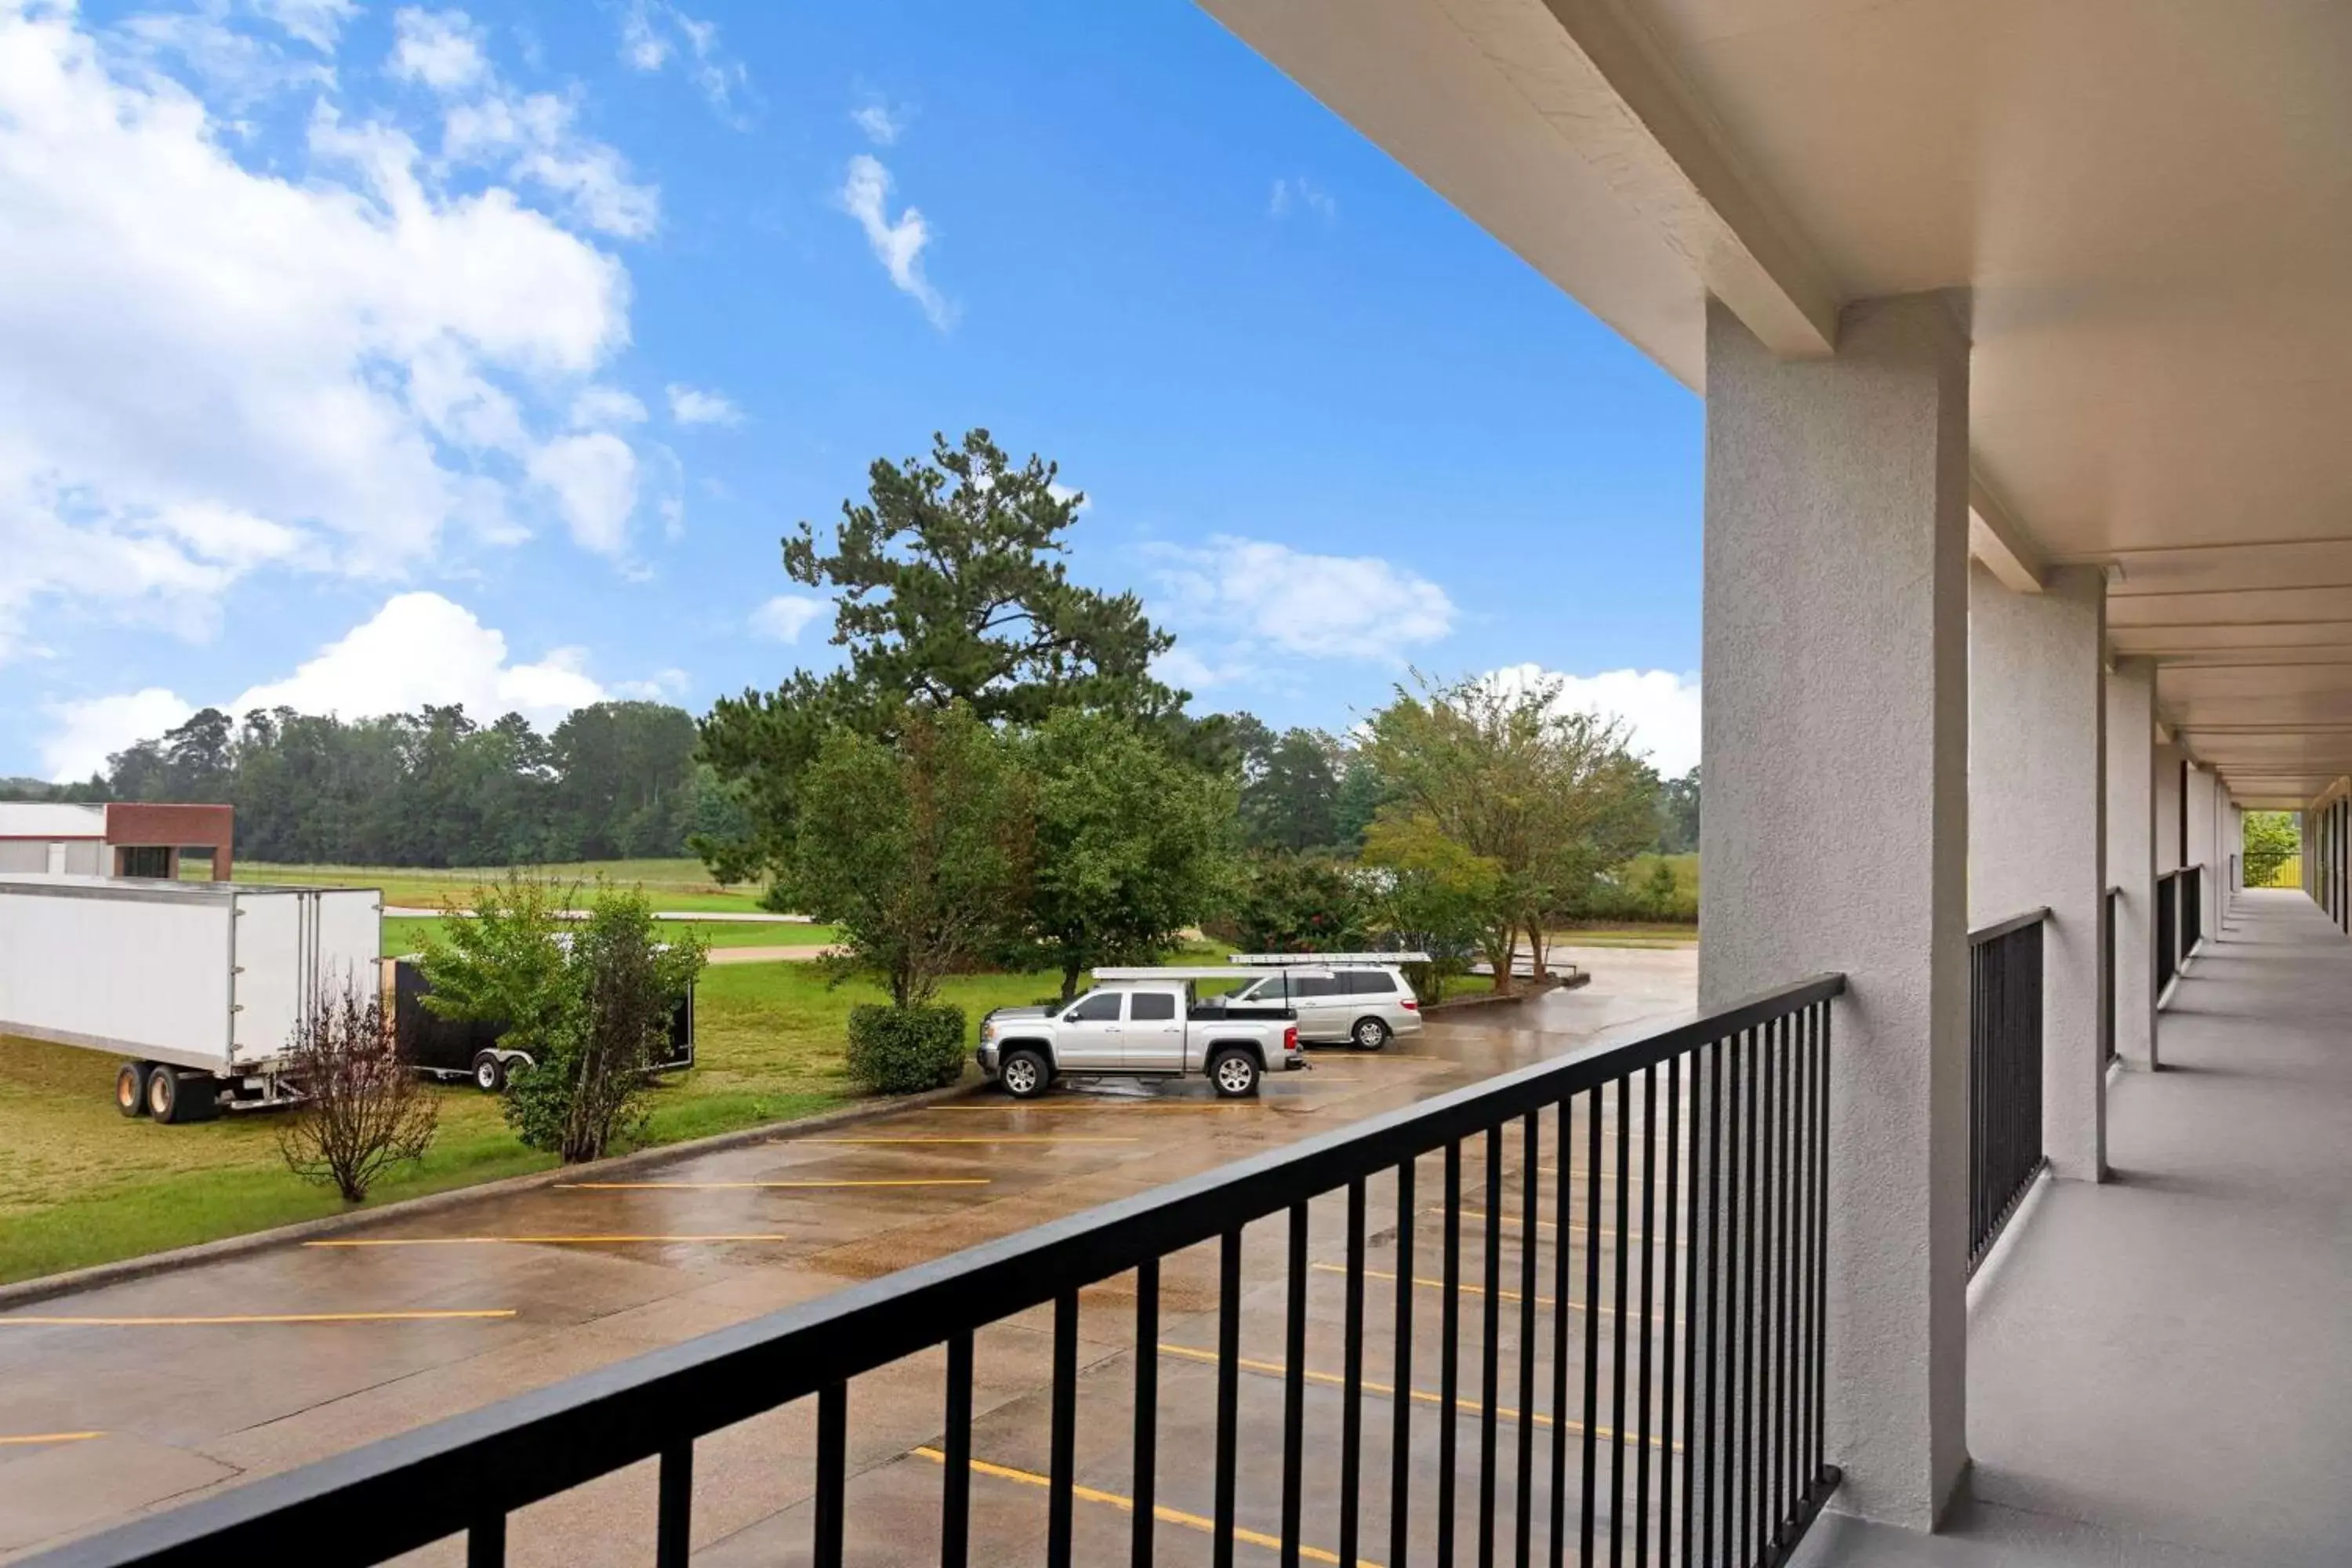 Property building, Balcony/Terrace in Super 8 by Wyndham Brookhaven